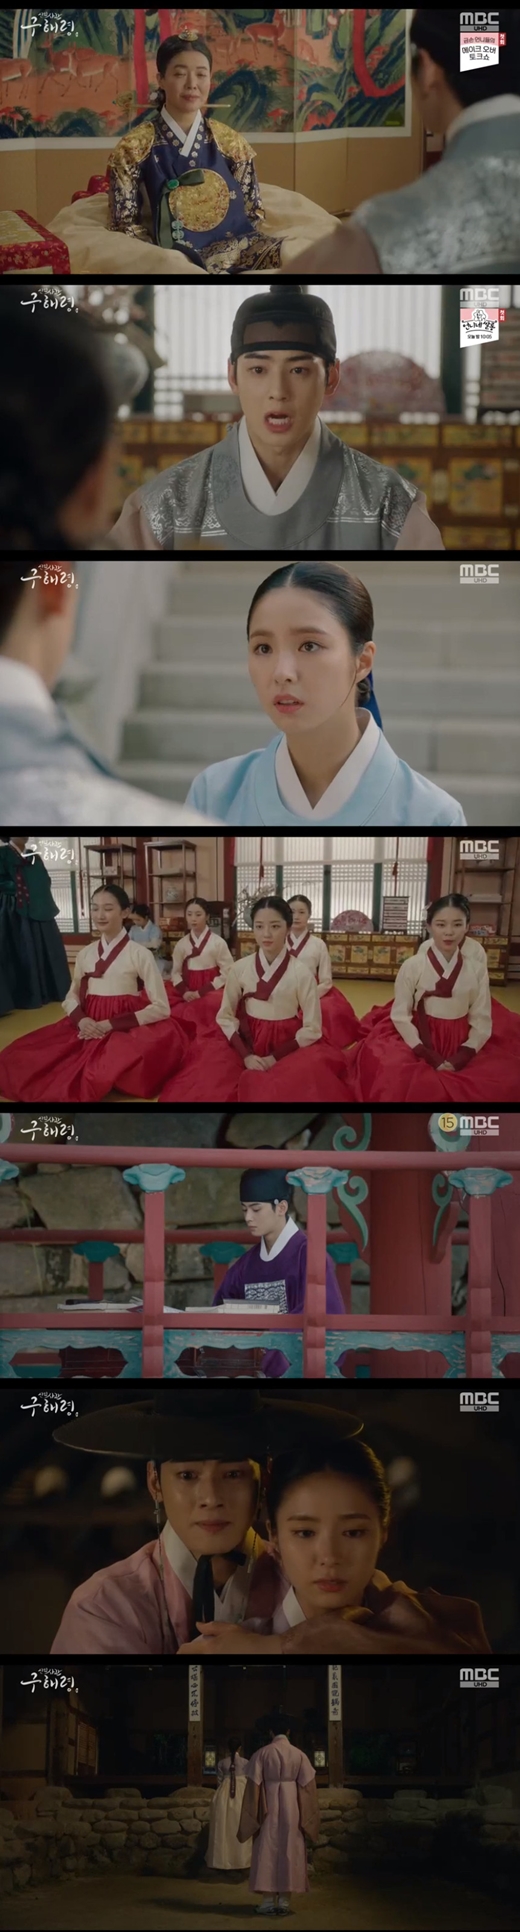 New officer Rookie Historian Goo Hae-ryung Shin Se-kyung rejected Cha Eun-woos heart.In the MBC drama The New Entrepreneur Rookie Historian Goo Hae-ryung (directed by Kang Il-soo Han Hyun-hee, the playwright Kim Ho-soo), which was broadcast on the 5th night, Rookie Historian Goo Hae-ryung, who rejects Lee Lims mind, was portrayed.On this day, Lee Lim asked Dae-bae (Kim Yeo-jin) to collect the land order, but he was rejected.Irim told Rookie Historian Goo Hae-ryung to tell her heart.Rookie Historian Goo Hae-ryung said: Im telling you, I dont want to live as a couple in the ear, I dont want to be there.Min Woo-won (Lee Ji-hoon) told Rookie Historian Goo Hae-ryung: From today, go to the old Kwonji as a contrast.Take charge of the ceremonial record of Sejo of Joseon.Rookie Historian Goo Hae-ryung saw the eldest daughter of Sobaek Sun, who had been contrasting since the first house.Rookie Historian Goo Hae-ryung was struggling to drink on the night he returned from his entrance examination at the house.Song Sa-hee (Park Ji-hyun) went to see the seating court in anger at the fact that he suddenly heard it in the three-way house. Song Sa-hee asked, What happened? Song Sa-hee said, I am in the empty seat.I have no intention of marrying Sejo of Joseon. The left-winger replied, You came to me to be my family, and I decide how to write.Song had to enter the palace, but instead of going to the palace, he went to the temple. Song went to see the left seat again.Song Sa-hee entered the Donggungjeon. The Se-ja (Park Ki-woong) was pushed into Song Sa-hee. Song Sa-hee said, I wanted Choices right to have it, not what I wanted.I wanted to live with my Choices without being swayed by anyone. I believed that I could live with her.I went to my life, not to leave it all in his hands. You think I got what I wanted. My life isnt mine.I realized how miserable my heart is. Irim was struggling to imagine the future with Rookie Historian Goo Hae-ryung.Irim visited Rookie Historian Goo Hae-ryung at night; Rookie Historian Goo Hae-ryung said, Go back.Lee Lim held such a Rookie Historian Goo Hae-ryung, who said, Ill throw it all away.If you dont want to live as the wife of Sejo of Joseon, Ill do it. I can throw it away. Irim said, You can go to a place where no one knows. We are happy in a place where no one knows. Just go what you want to do and I just stay with you.Just like that, he added.Rookie Historian Goo Hae-ryung said: Reality is not a novel; it may be a beautiful ending in a novel, but reality is different.I am living with my baggage in my mind all the days of my life that do not end even if I cover the book.Lee said that he could live like that, but Rookie Historian Goo Hae-ryung said, We will be tired over time.I am tired and tired, and someday I hate each other and I will live with regretting Choices of this day. Irim said, I swear I will not do that, but Rookie Historian Goo Hae-ryung said, I am not Mama, but I do not believe me.If I suddenly have a very small regret... ...and it grows so that I blame Mama and hate her... ...can you bear it?Rookie Historian Goo Hae-ryung said: So go back, Im just this much person, meet someone with the same heart and live loved.Thats what Mama can do, he said.